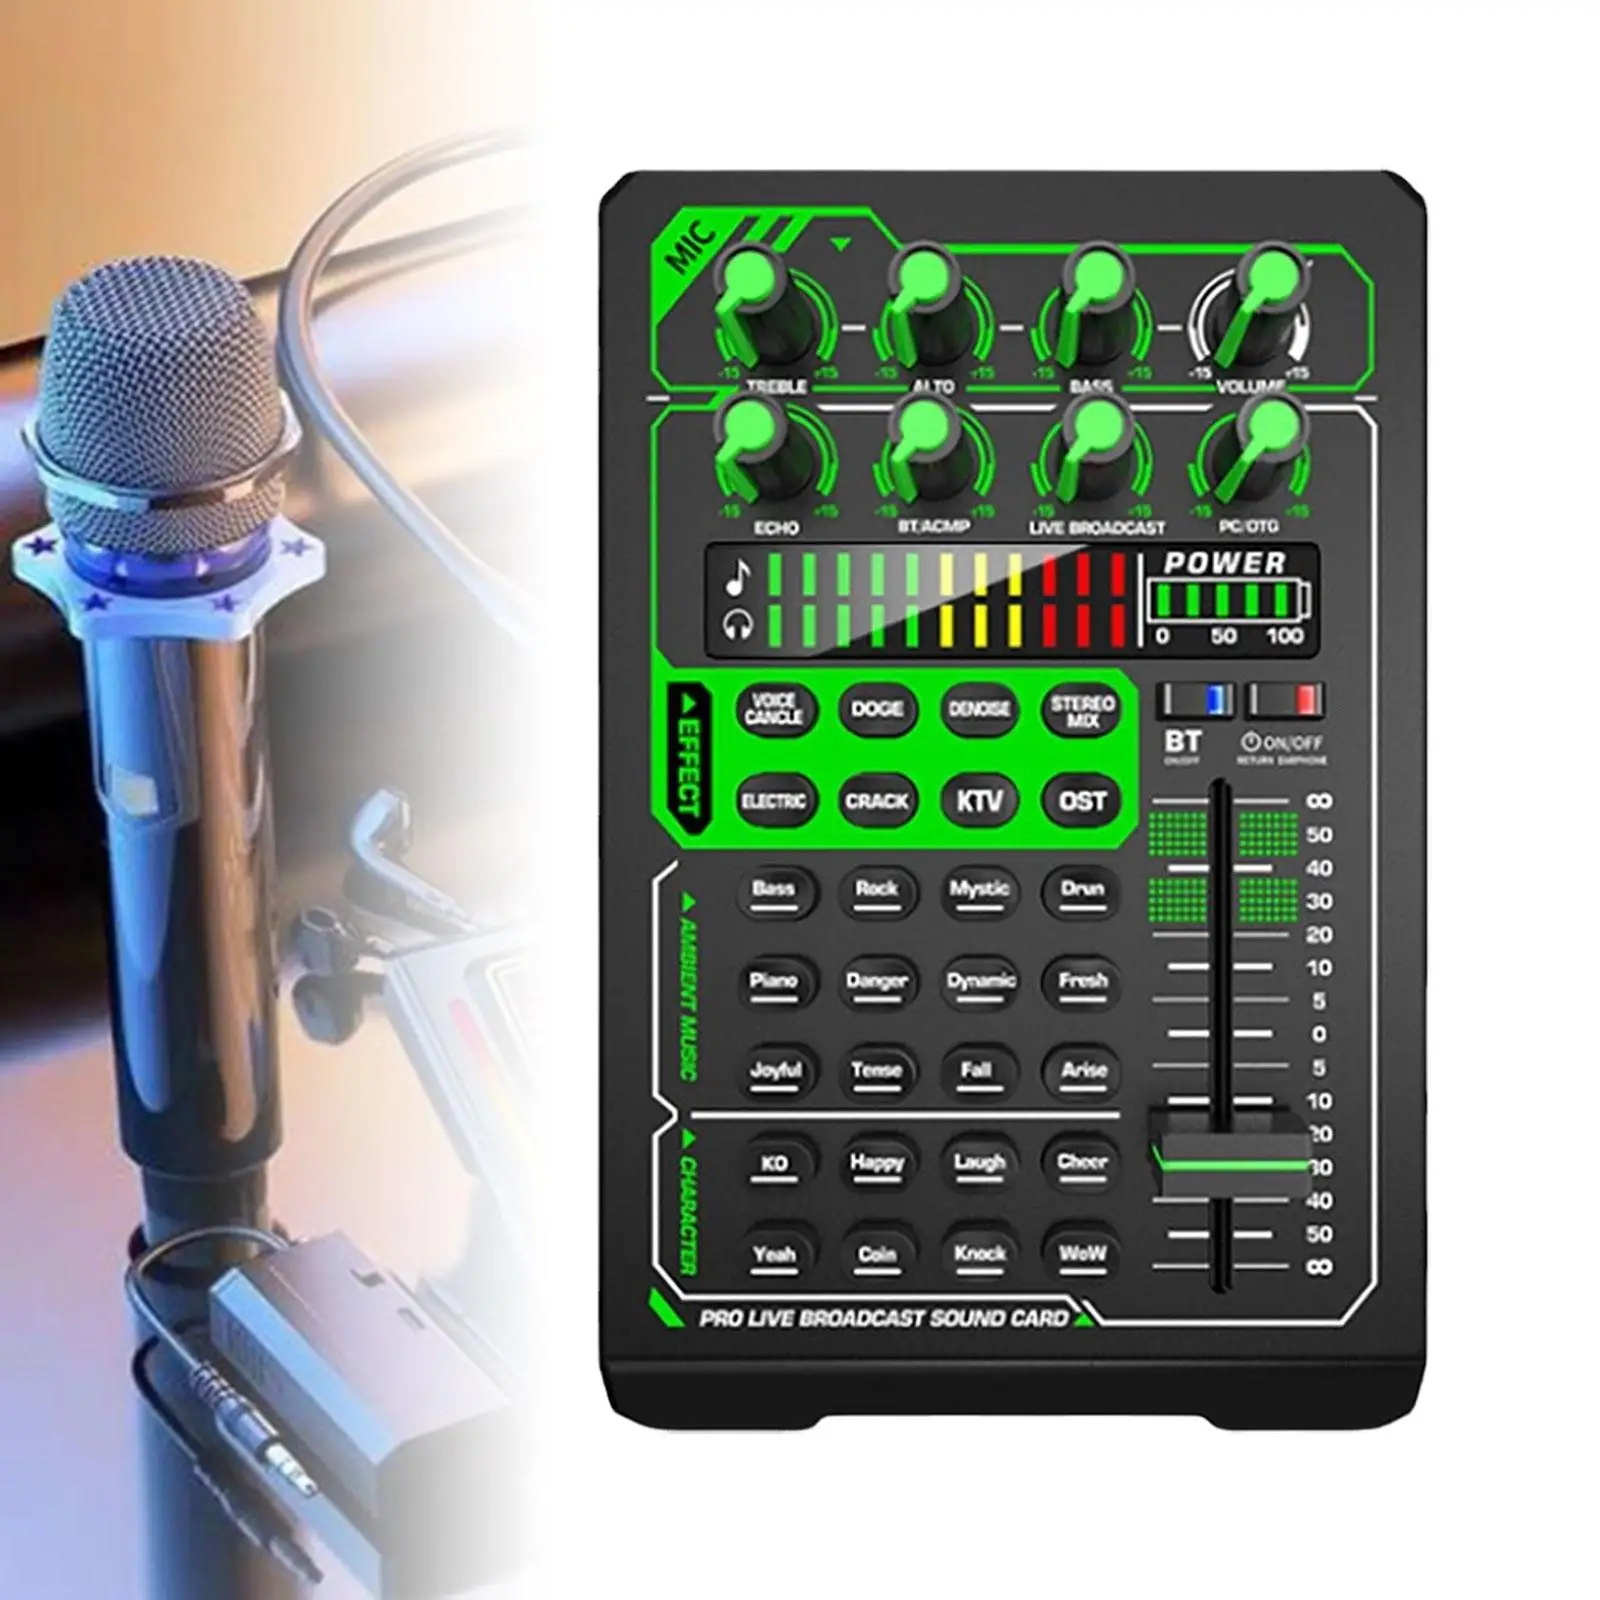 Live Broadcast Sound Card Plug and Play for Streaming Podcasts Studio Multiple Inputs Sound Mixer Board with 8 Control Knobs